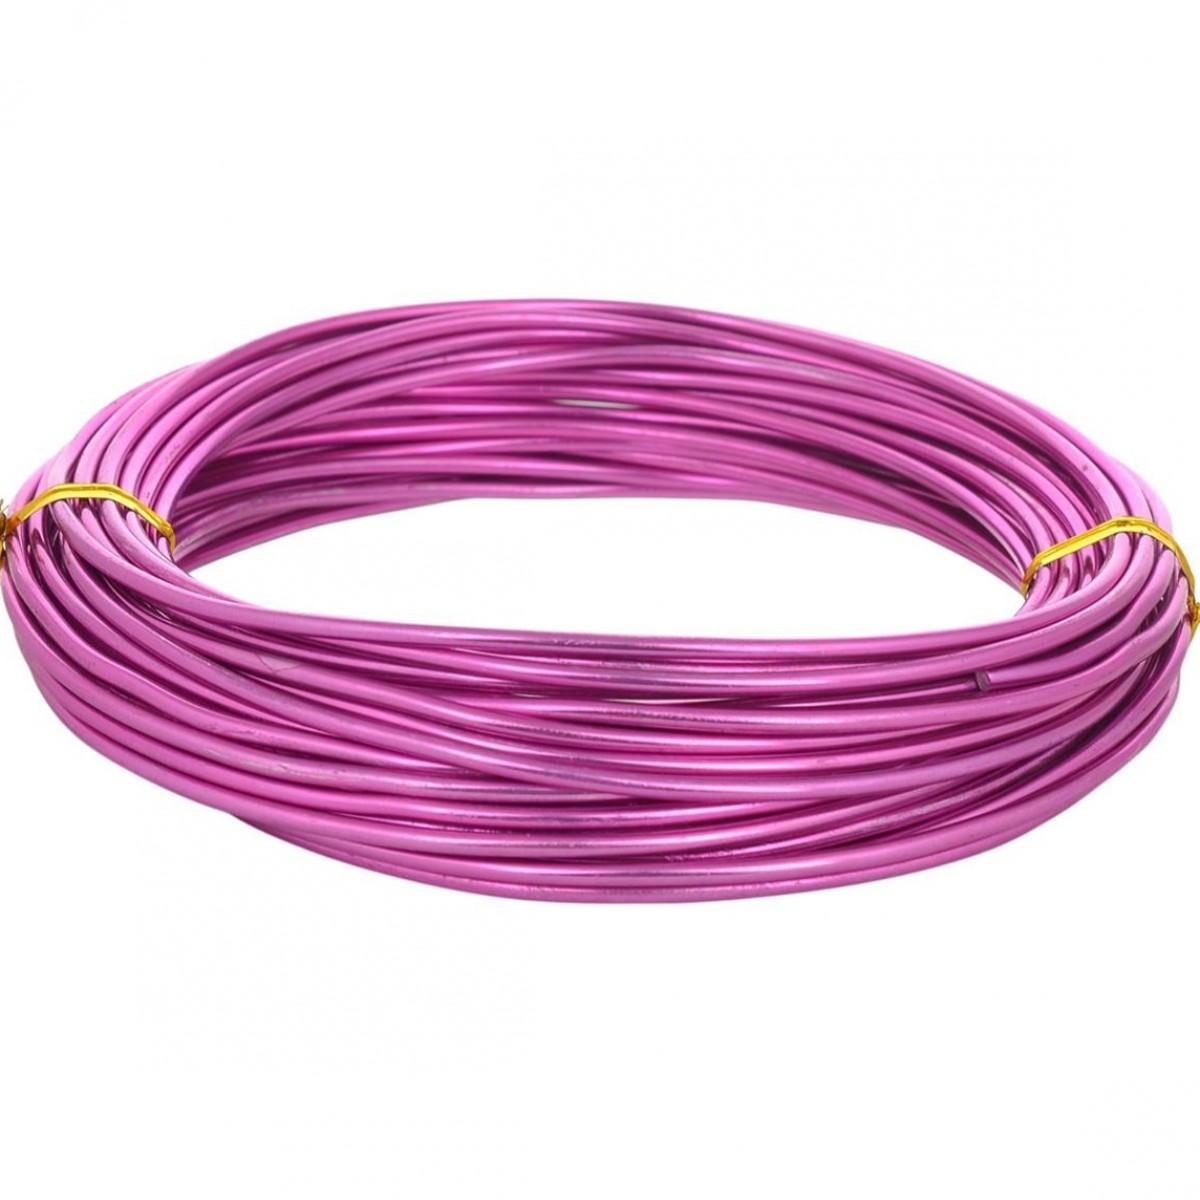 4006 Aluminium Wire Strong Pink 12guage 250mtr 5 Nos